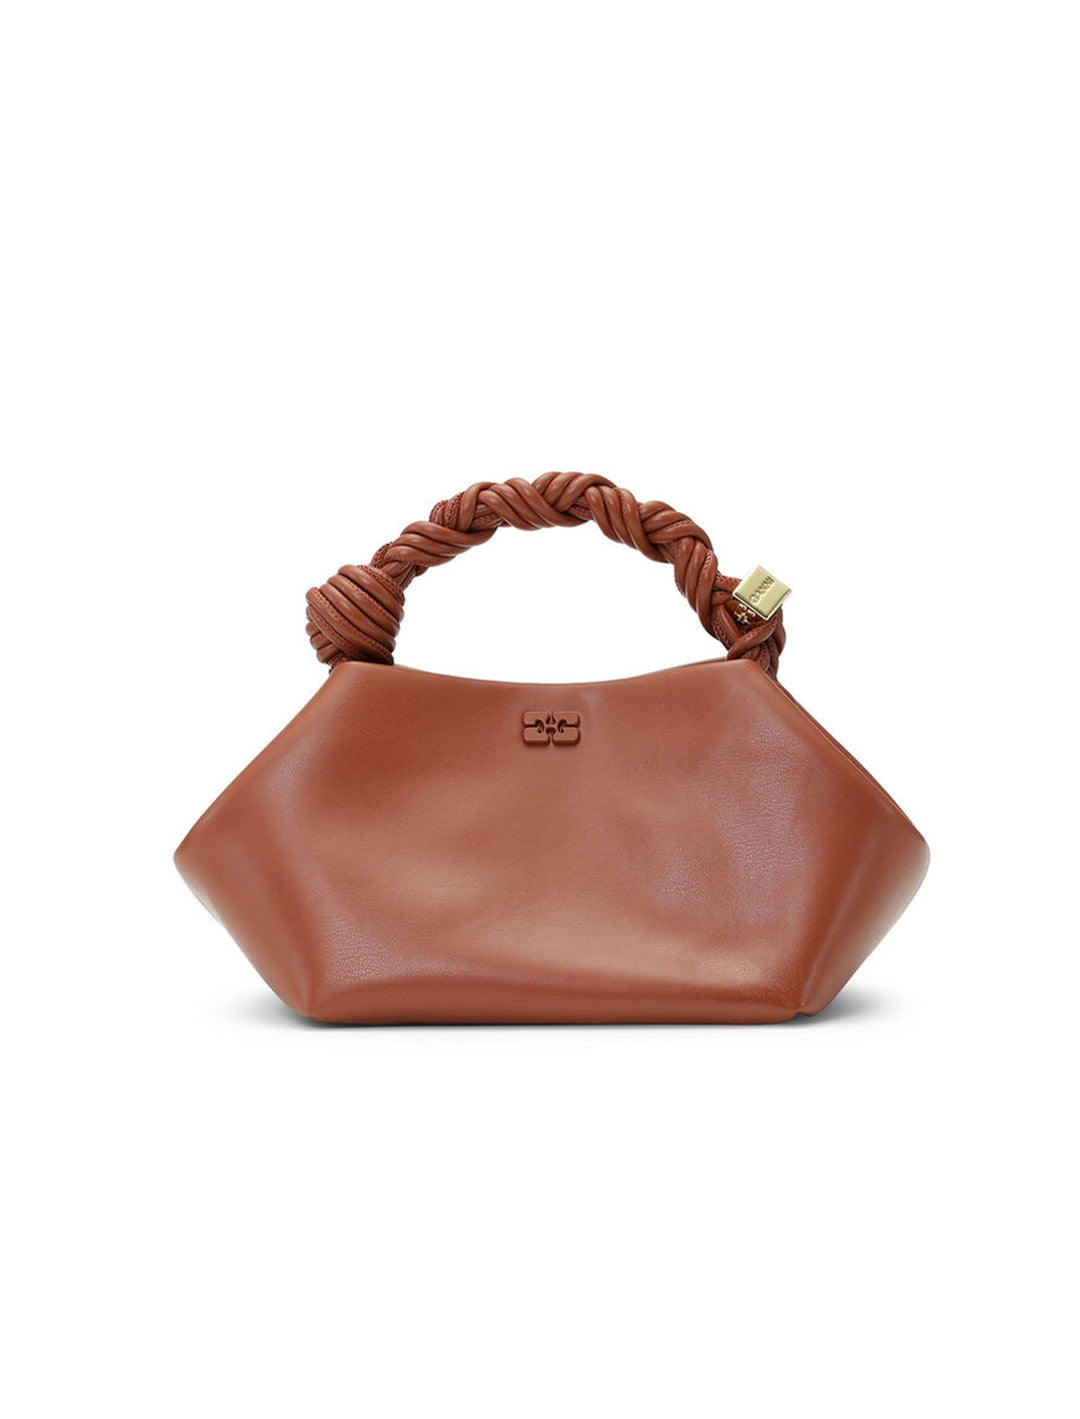 Front view of GANNI's small bou bag in terracotta.